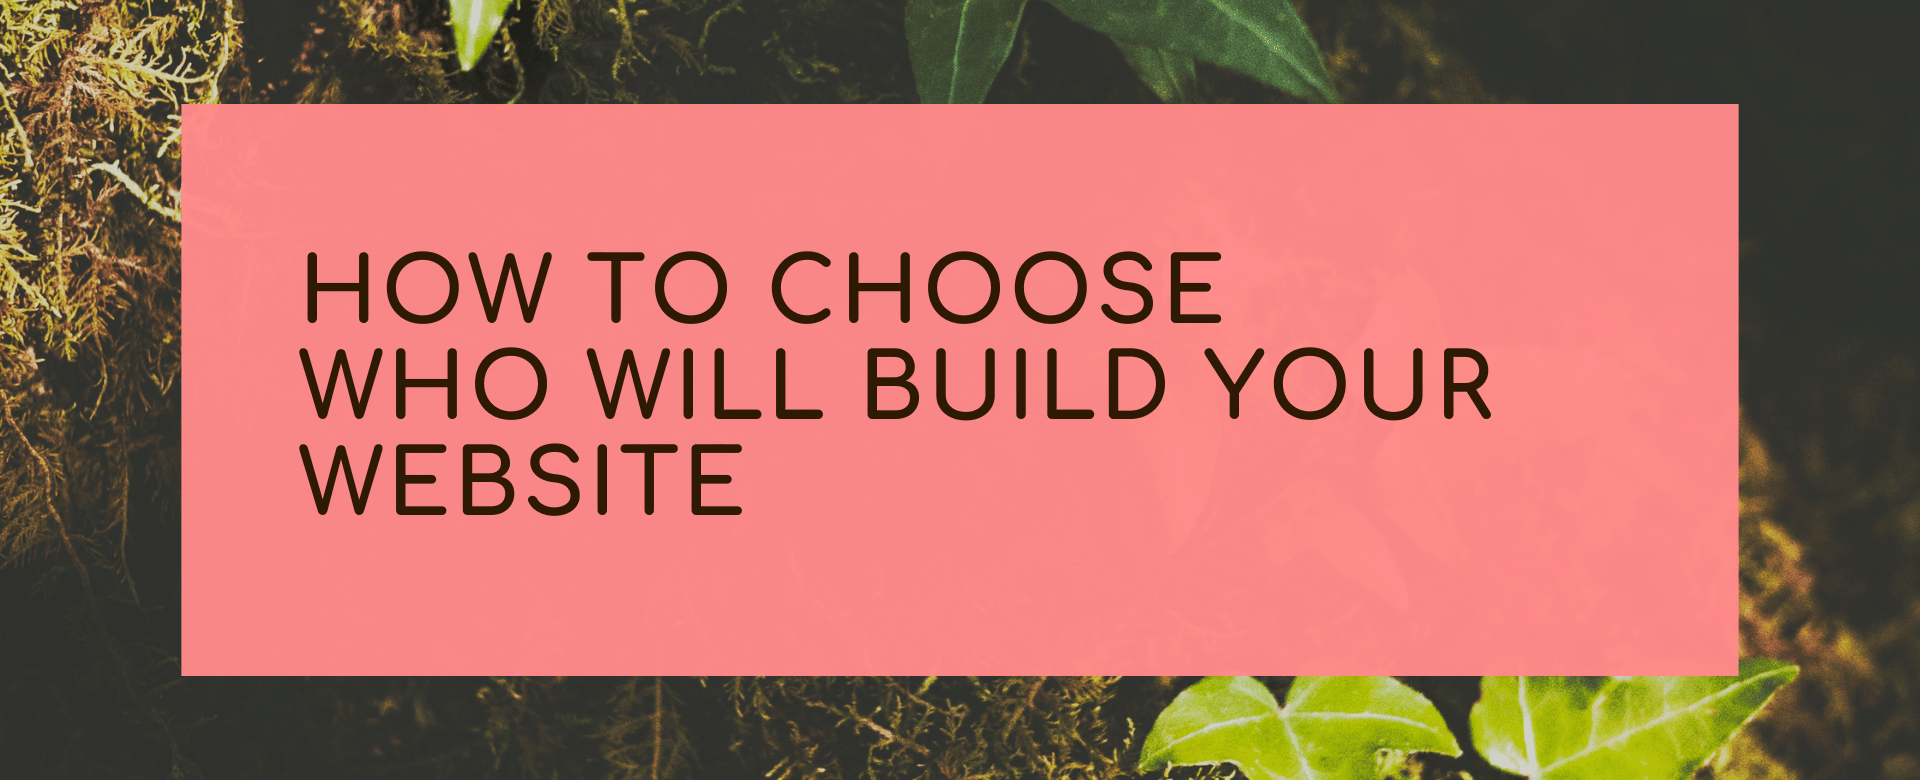 How to choose who will build your website